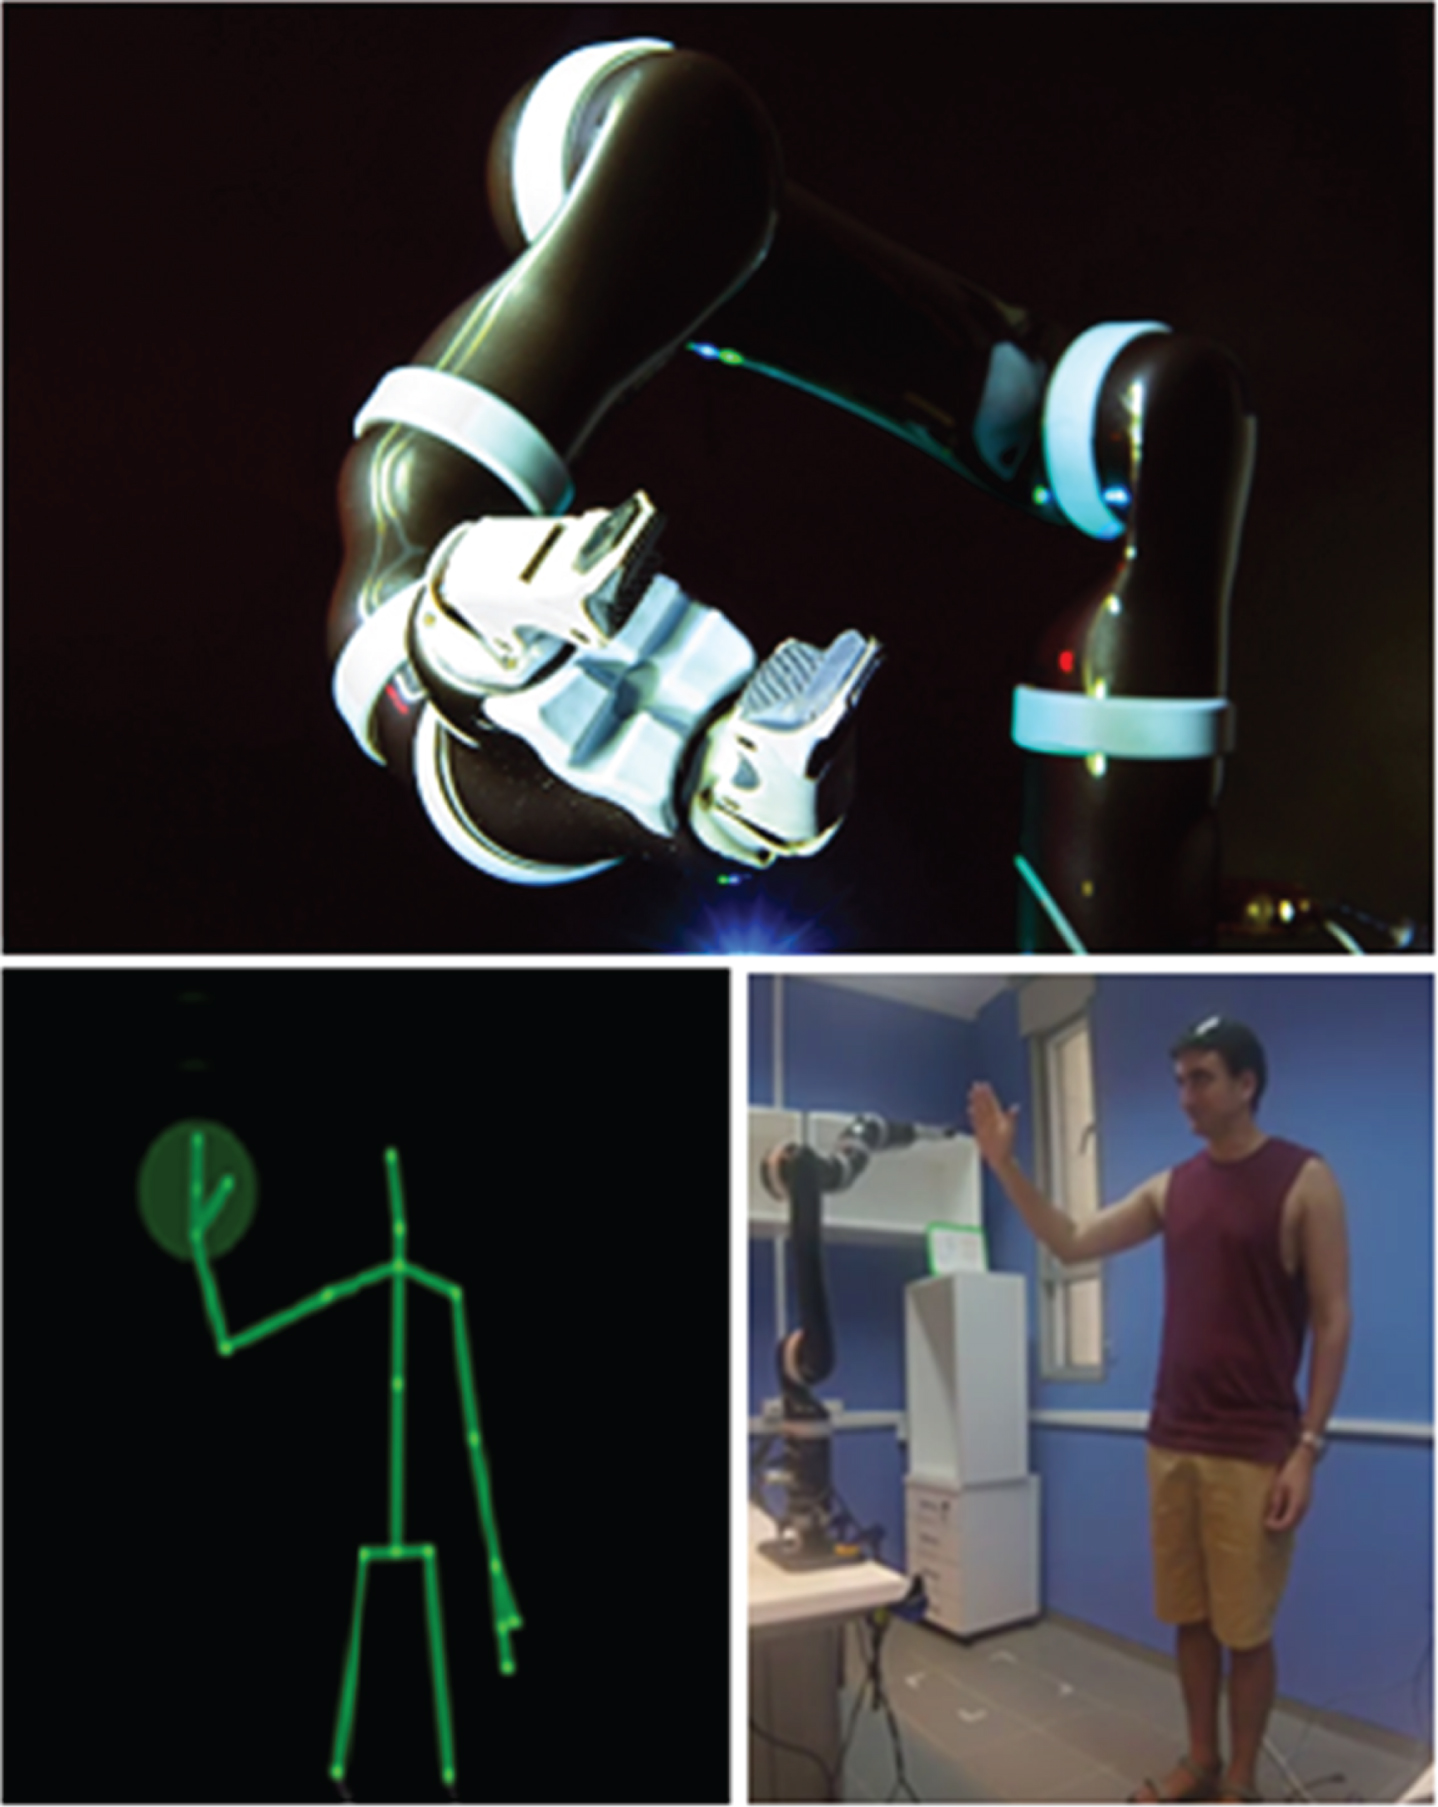 Experimental equipment. Top: The Kinova MICO robotic arm, which served as a partner in the mirror game. Bottom: a demonstration of the real-time location of the participants’ hand captured and displayed via a Kinect 2.0 camera (Left), as the participant interacted with the robotic arm (Right).